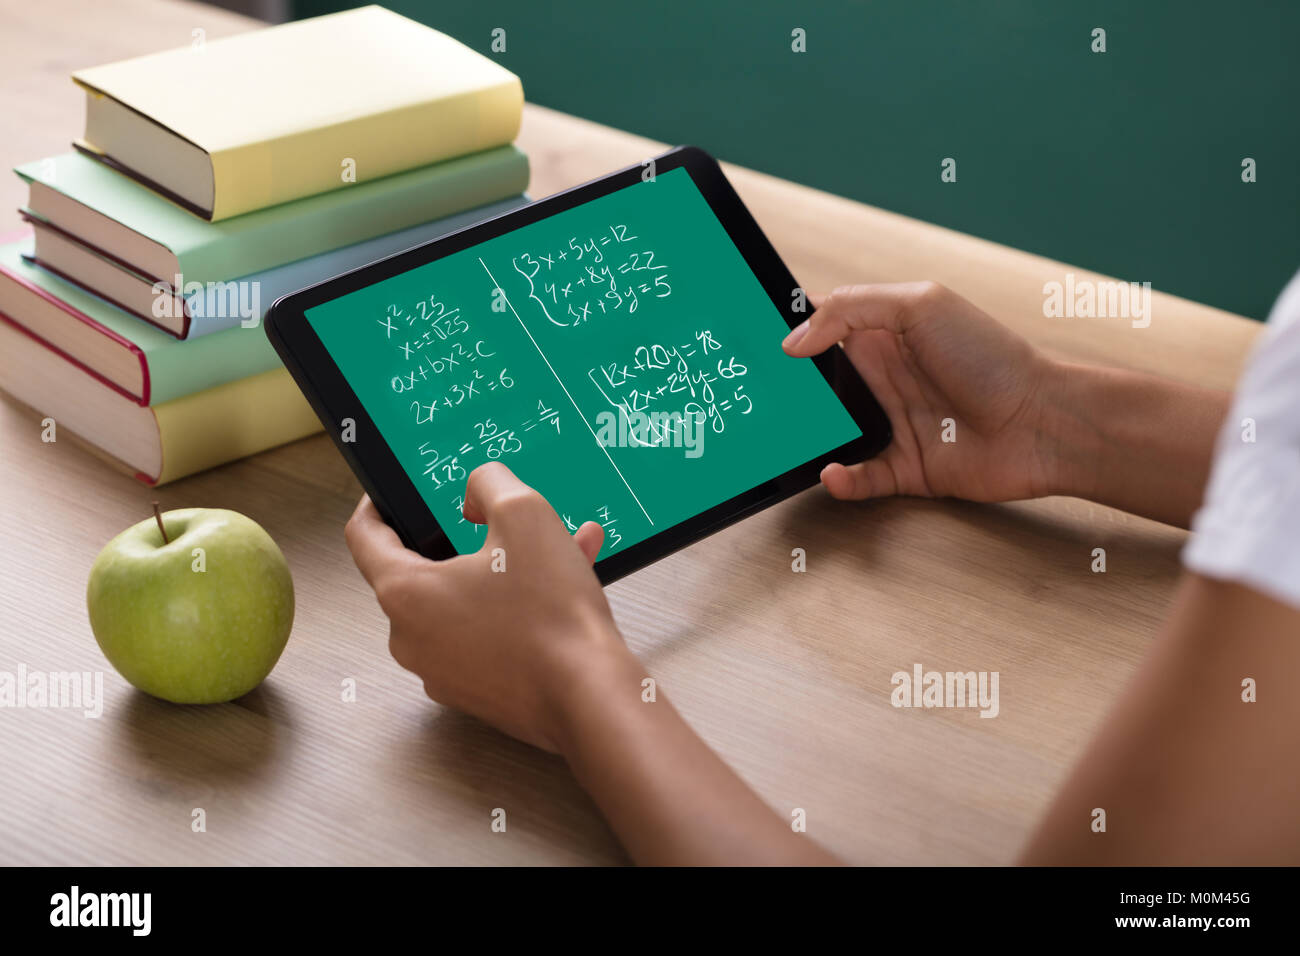 Close-up Of Human Hand Solving Math Problems On Digital Tablet In Classroom Stock Photo